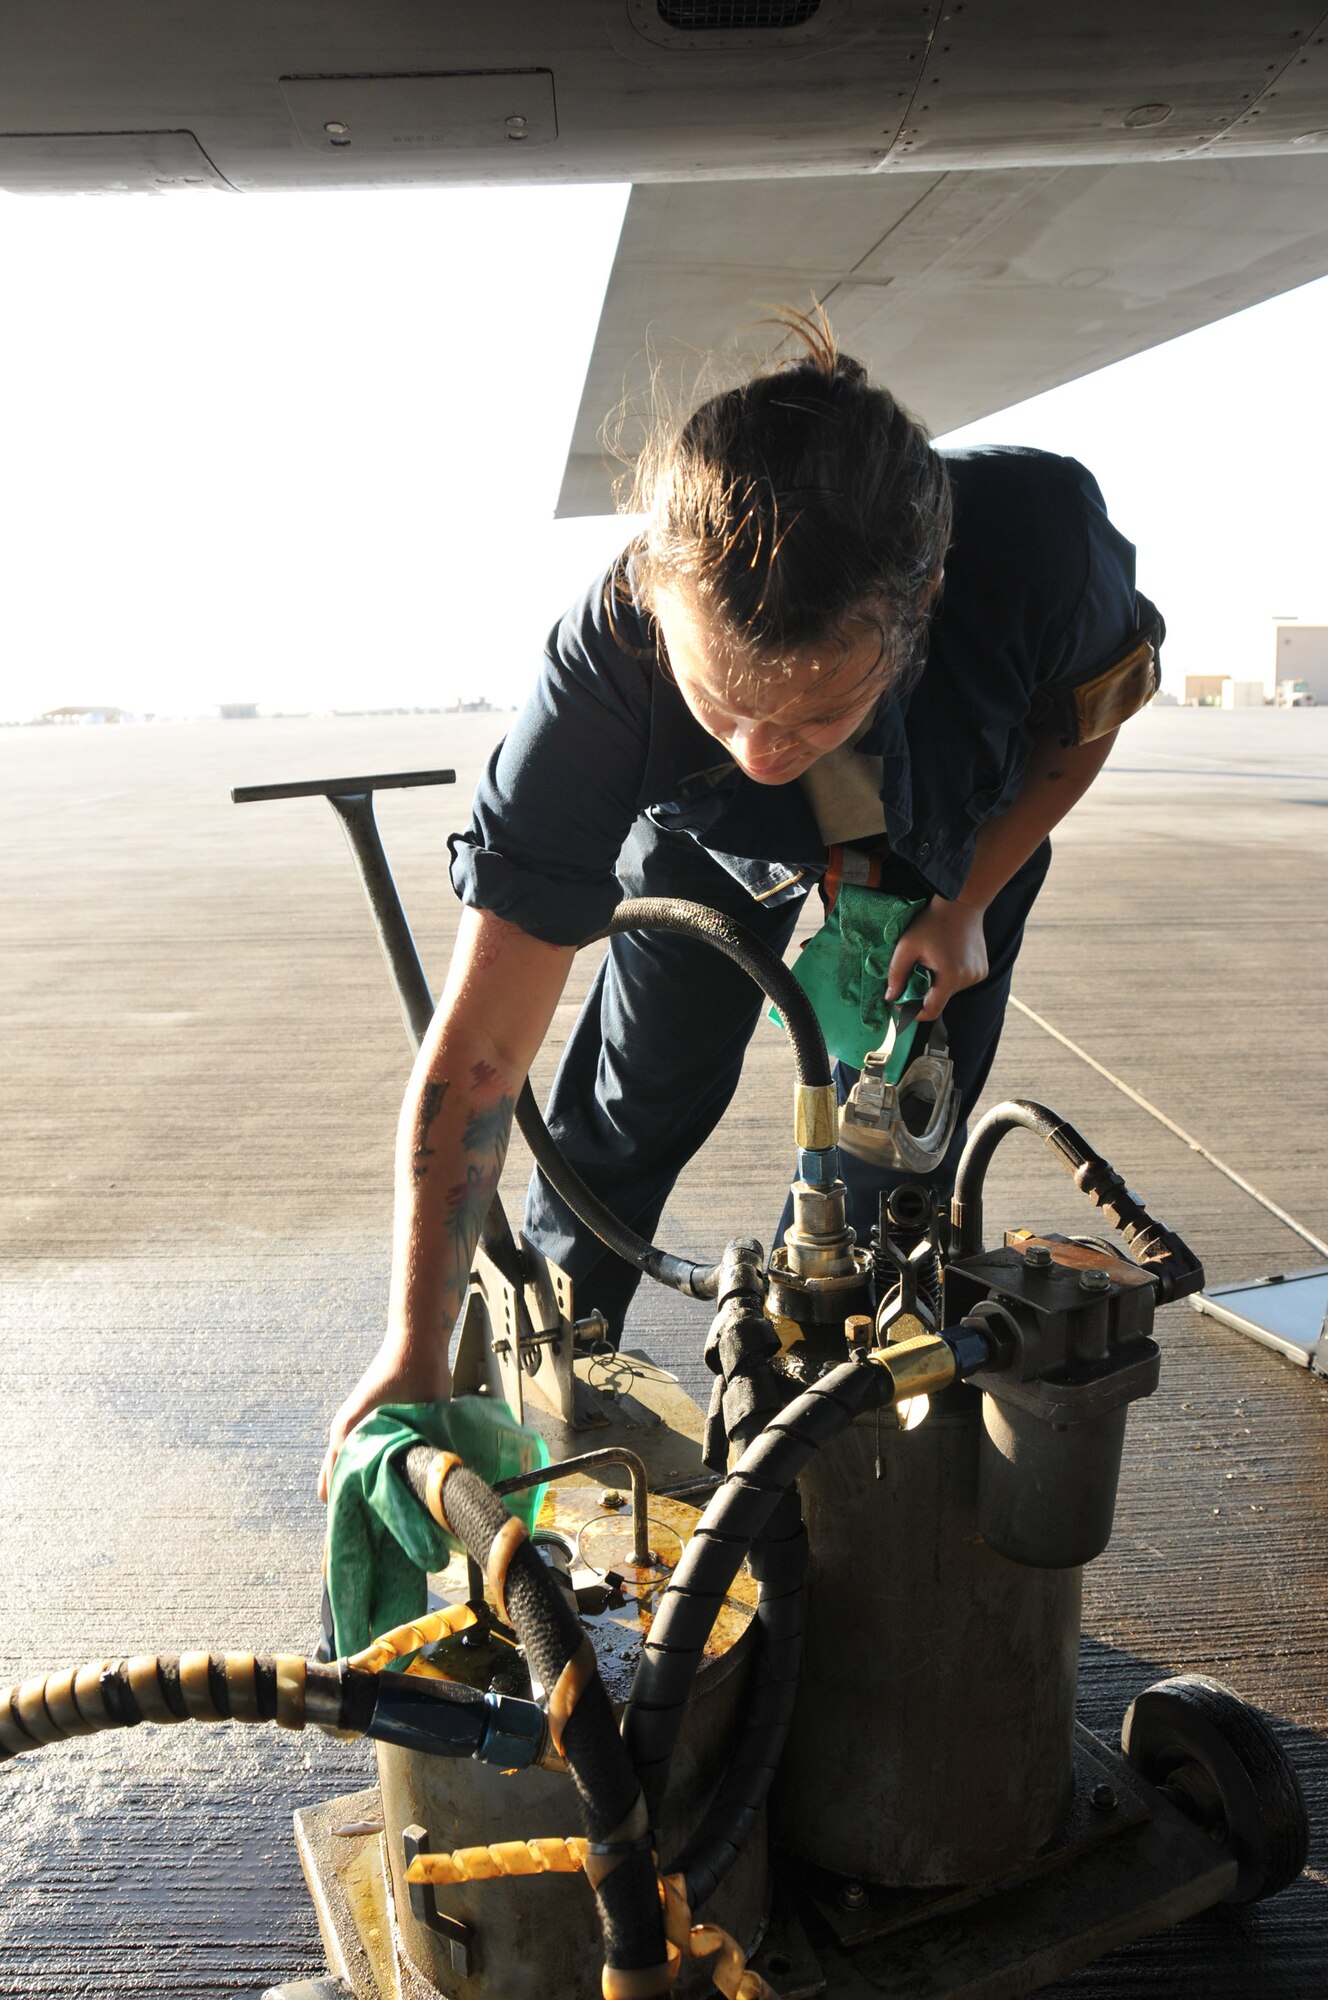 Senior Airman Alexis, 379th Expeditionary Aircraft Maintenance Squadron crew chief, performs a post-flight inspection on a B-1 B Lancer, Jan. 11, at Al Udeid Air Base, Qatar. After a B-1 mission is complete, Alexis and other maintainers, perform several post flight inspections to ensure the aircraft is mission ready. Alexis is deployed from the 307th Expeditionary Aircraft Maintenance Unit at Ellsworth Air Force Base, S.D. (U.S. Air Force photo by Tech. Sgt. Terrica Y. Jones/Released)